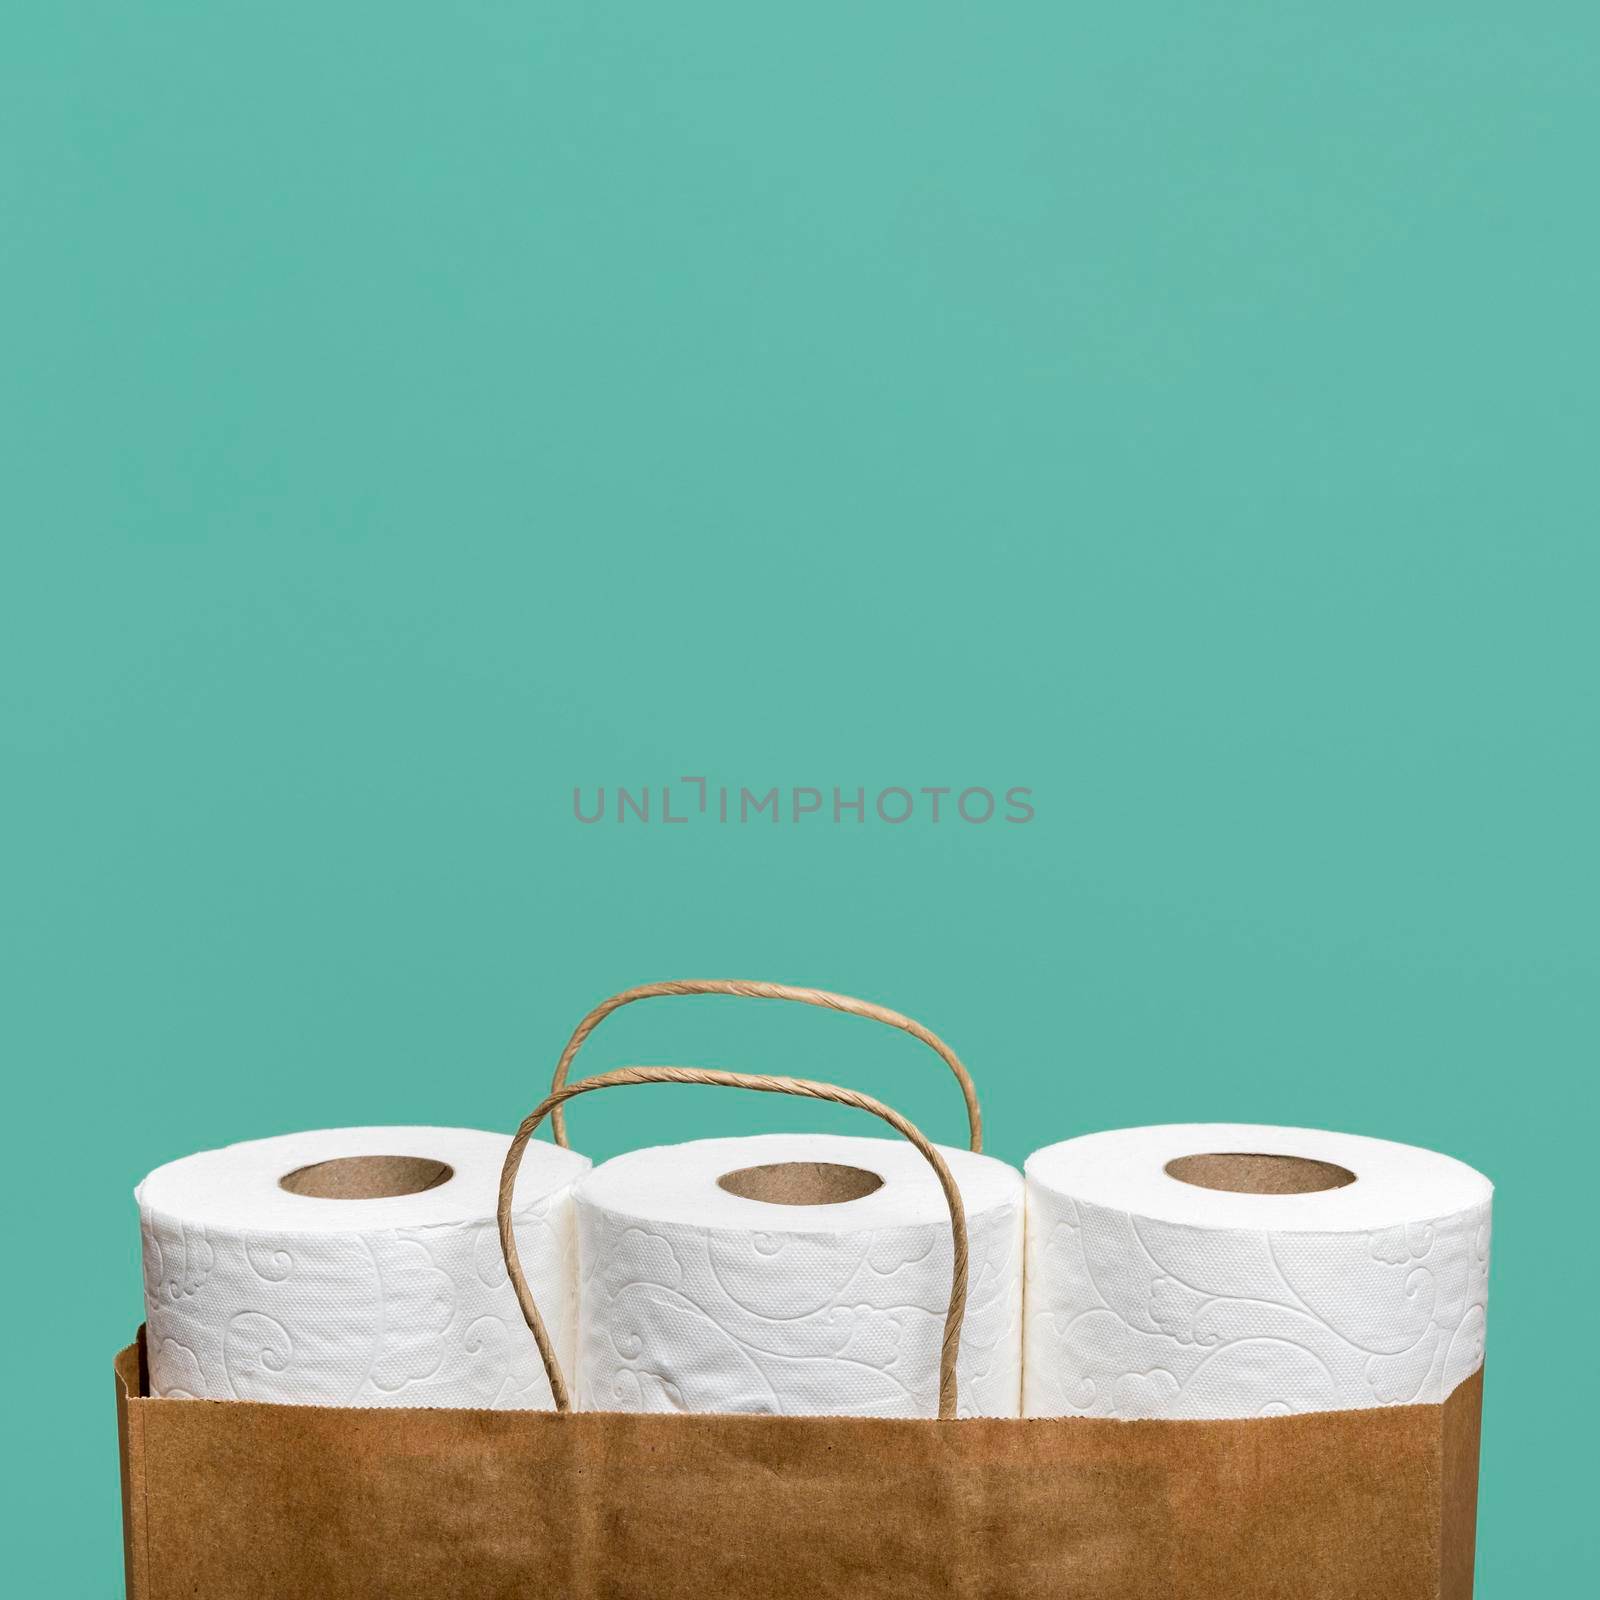 front view three toilet paper rolls paper bag. High quality photo by Zahard